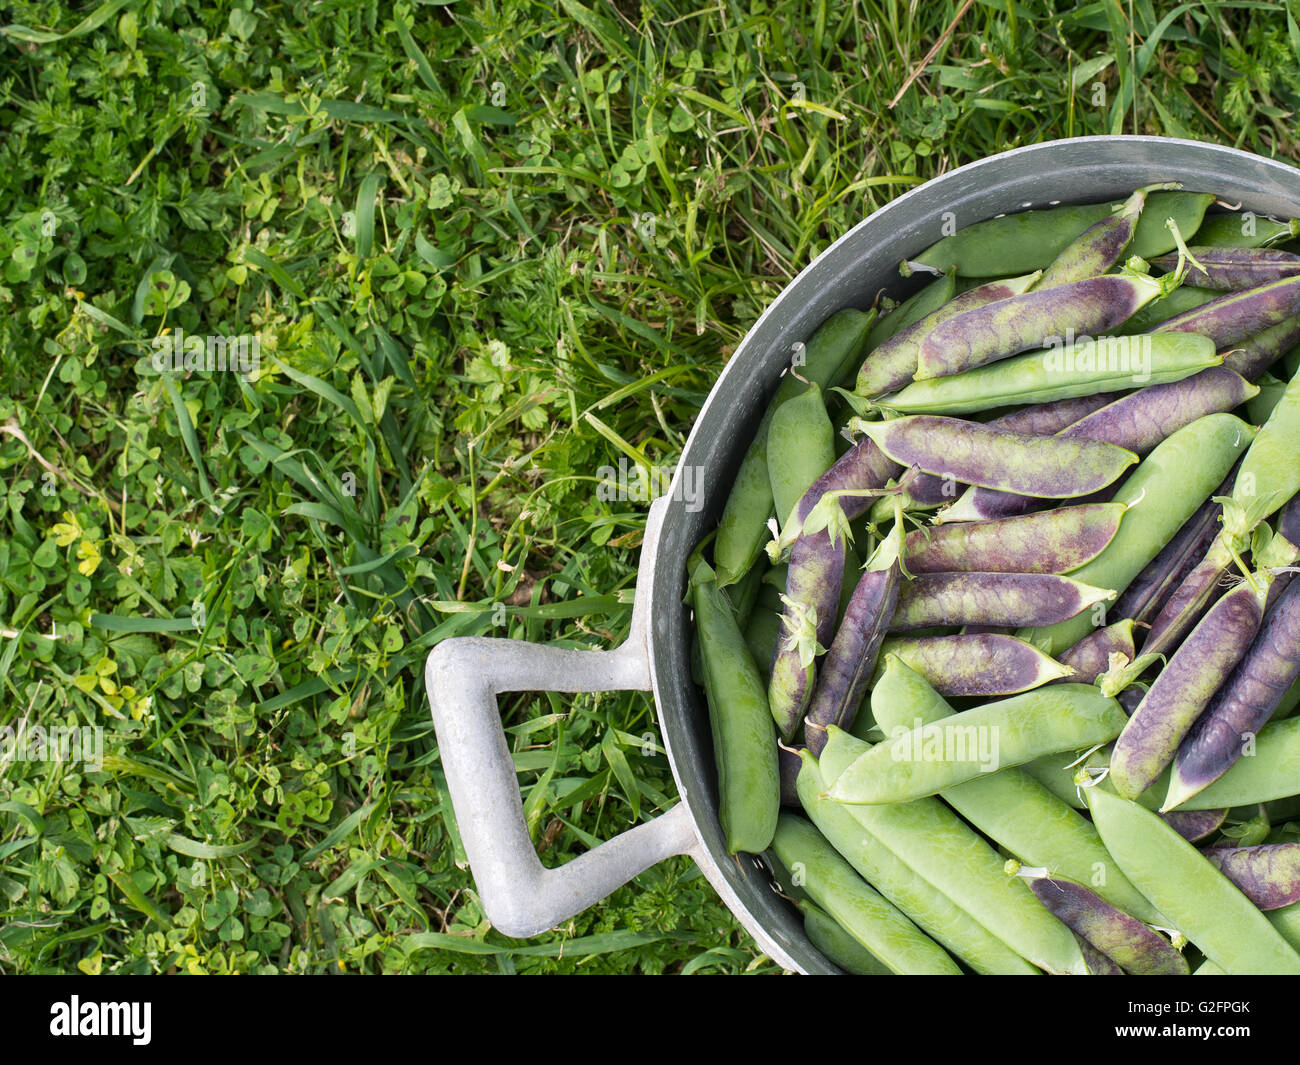 Fresh picked garden peas. Purple and green podded varieties. Stock Photo